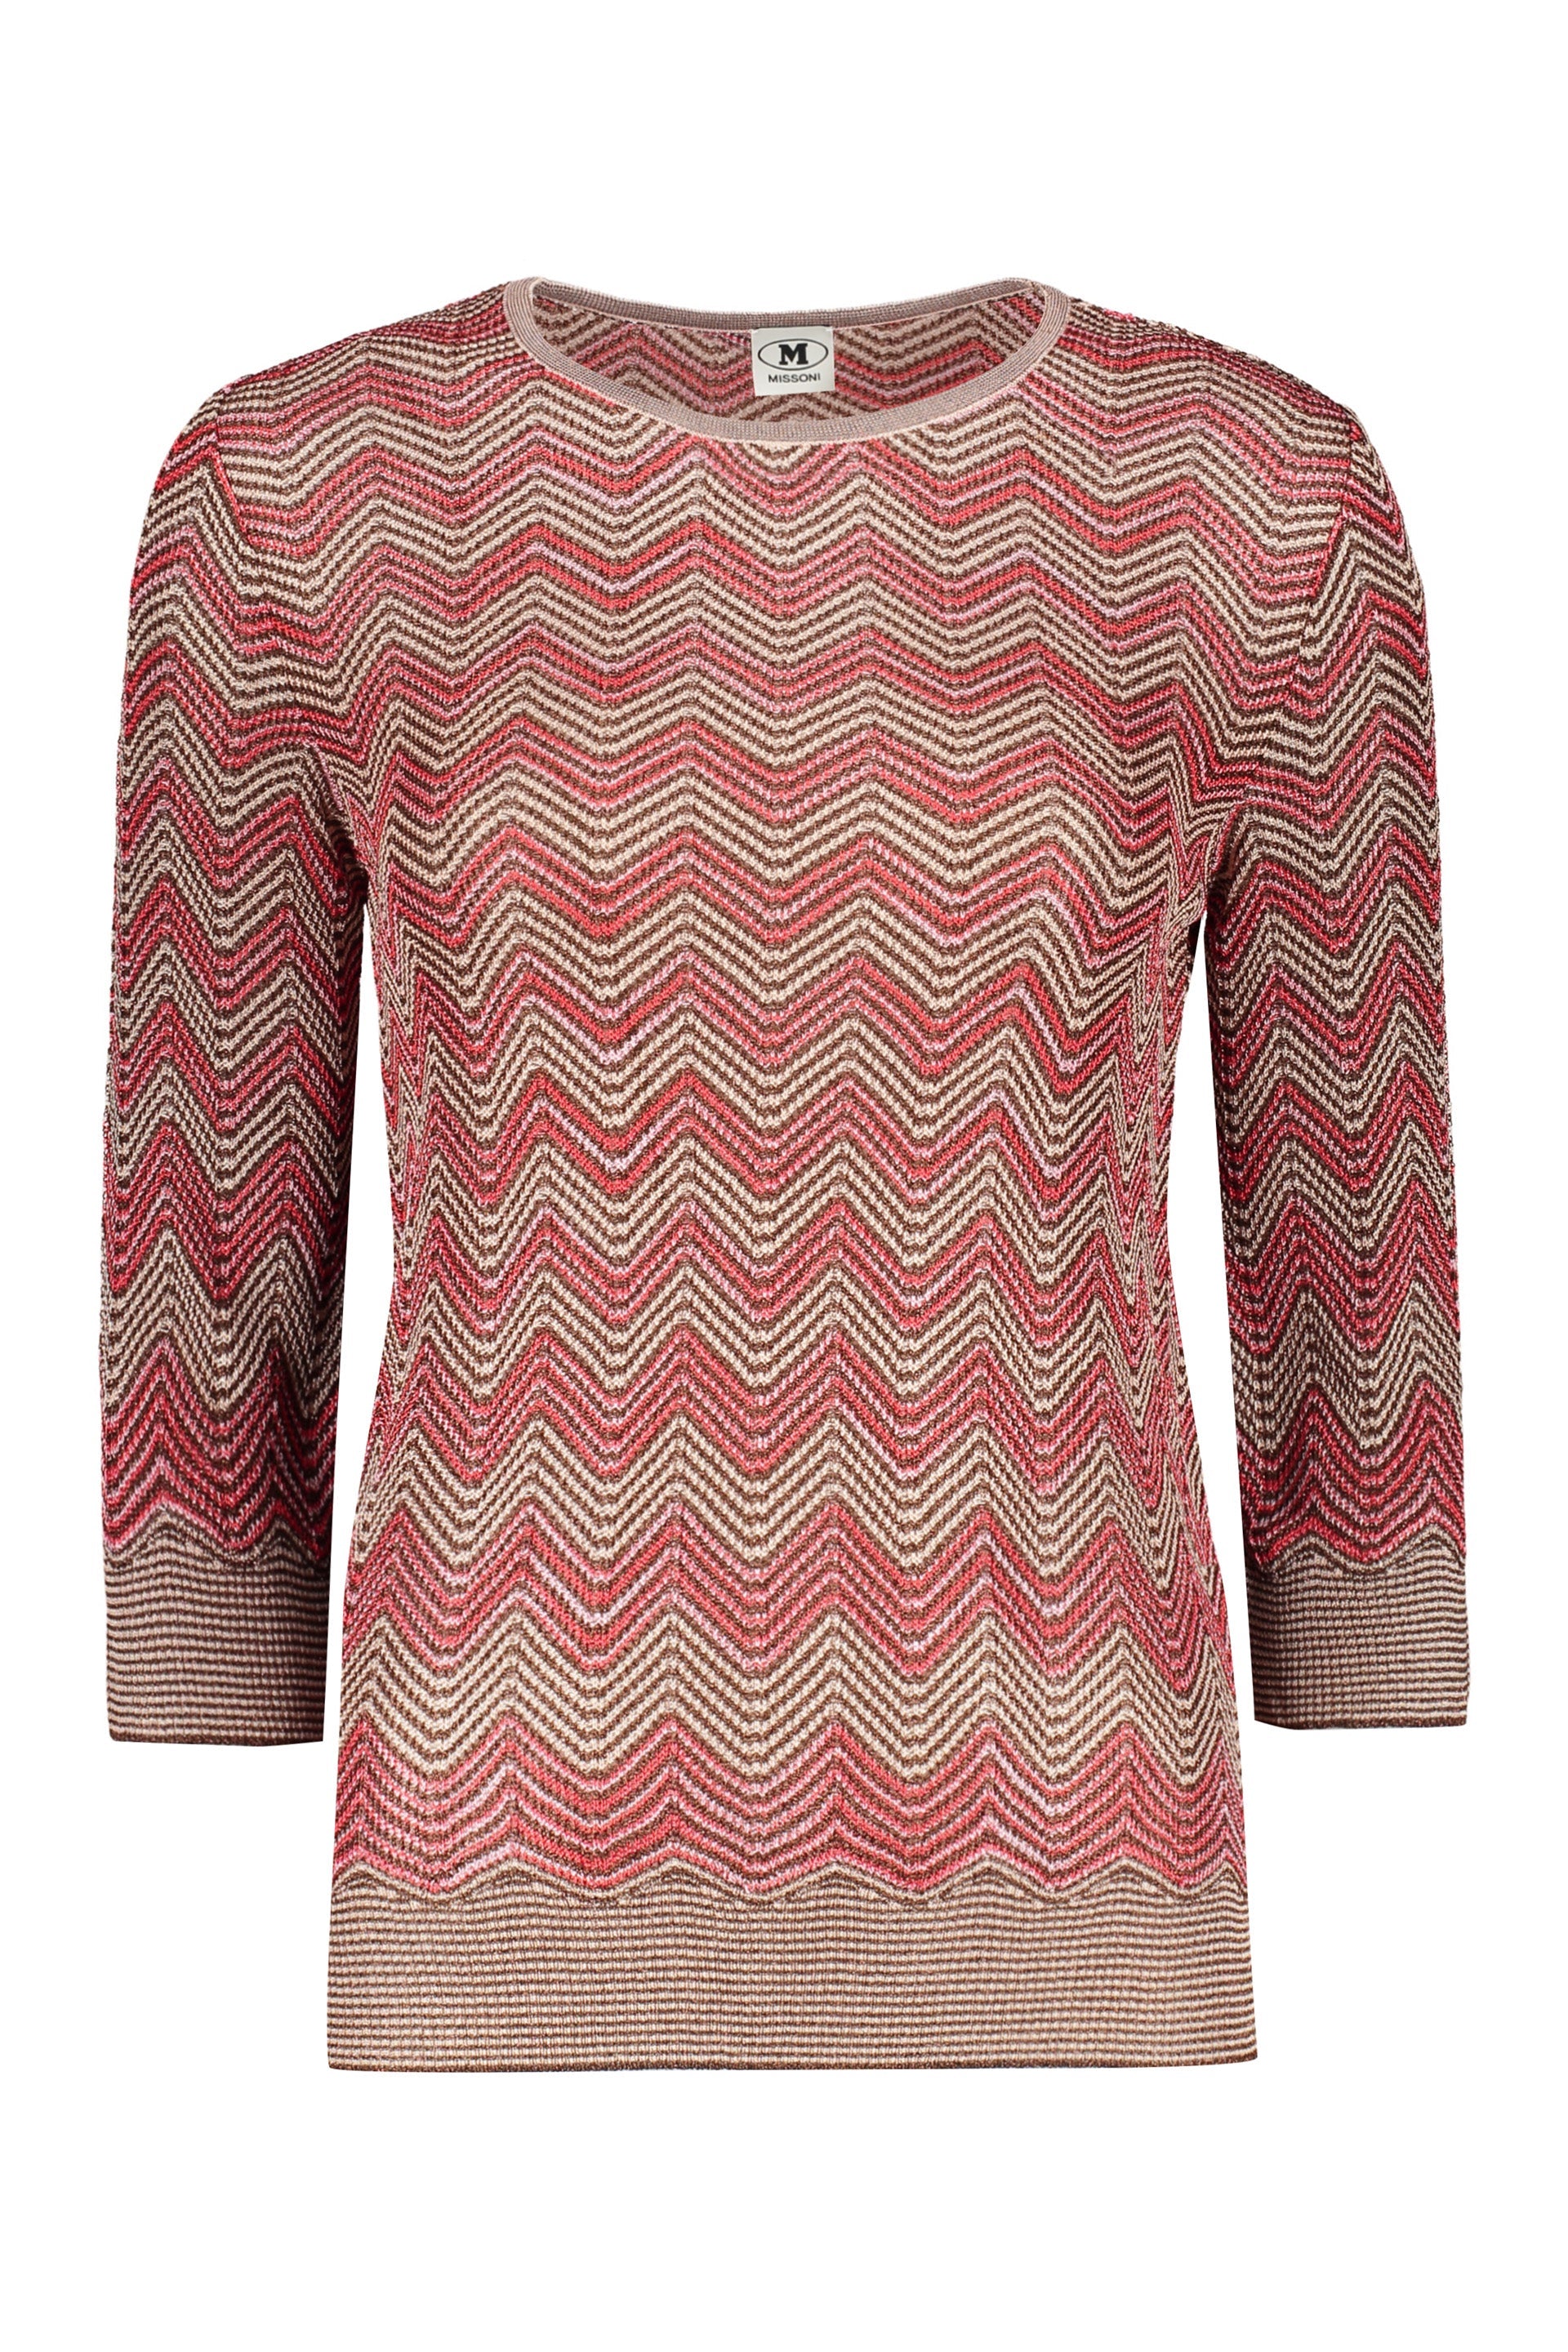 Missoni-OUTLET-SALE-Knitted-top-Shirts-L-ARCHIVE-COLLECTION_5320145f-8f4d-4b69-b6ea-7dbccbd85970.jpg